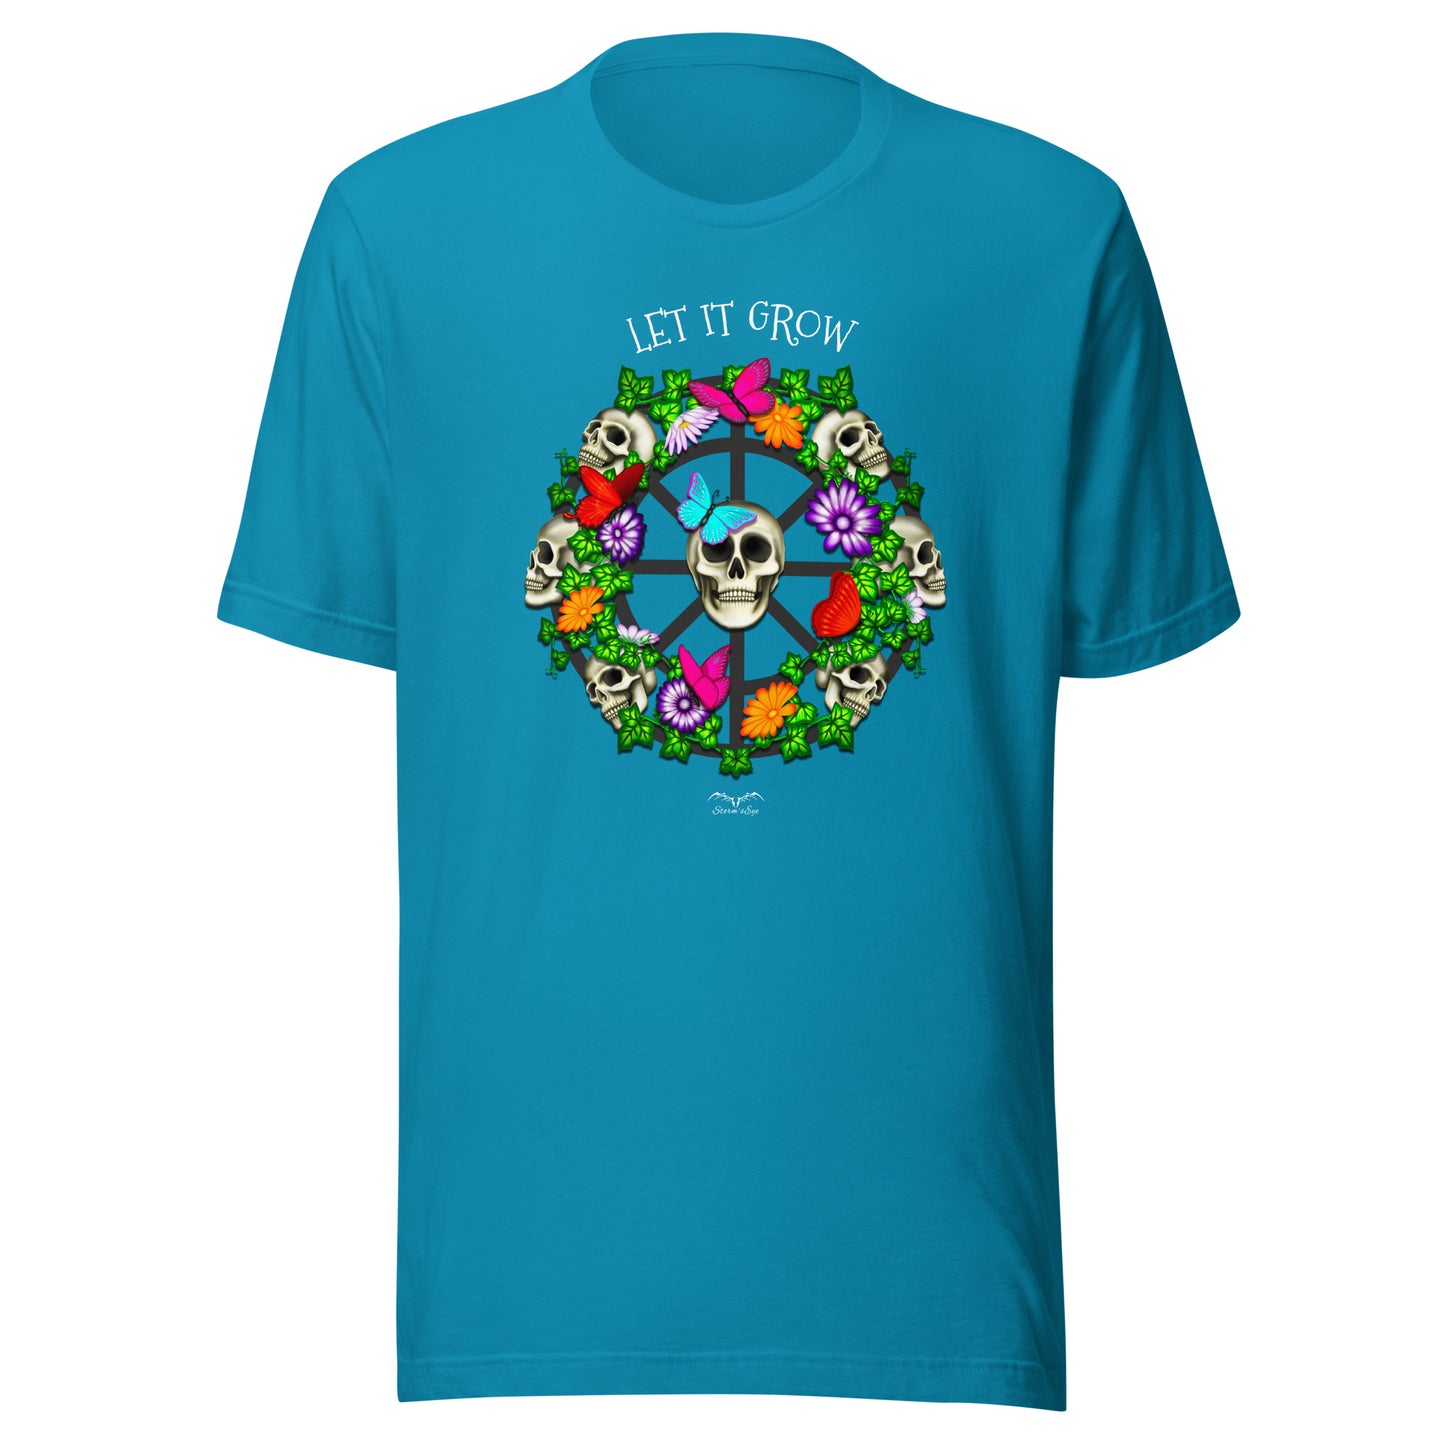 stormseye design skulls and flowers gothic T shirt, flat view bright blue